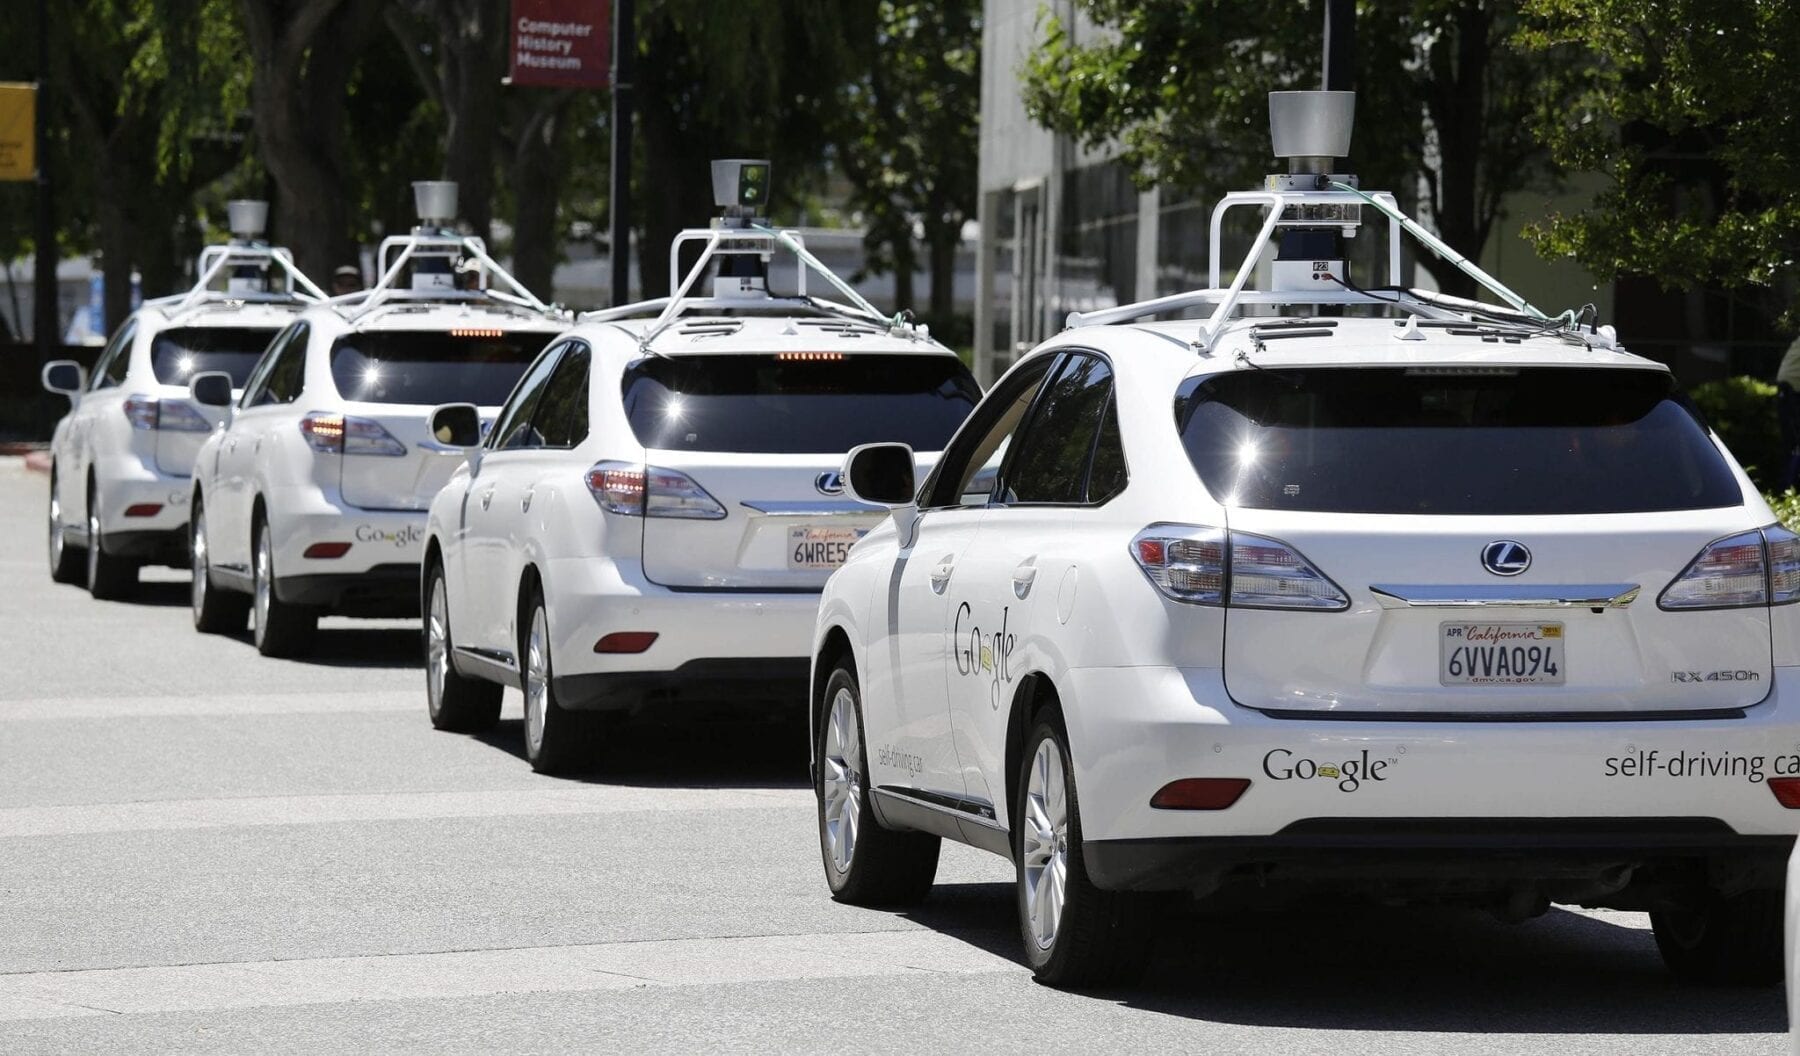 If We're Not Careful, Self-Driving Cars Will Be The Cornerstone Of The DRM'd, Surveillance Dystopias Of Tomorrow